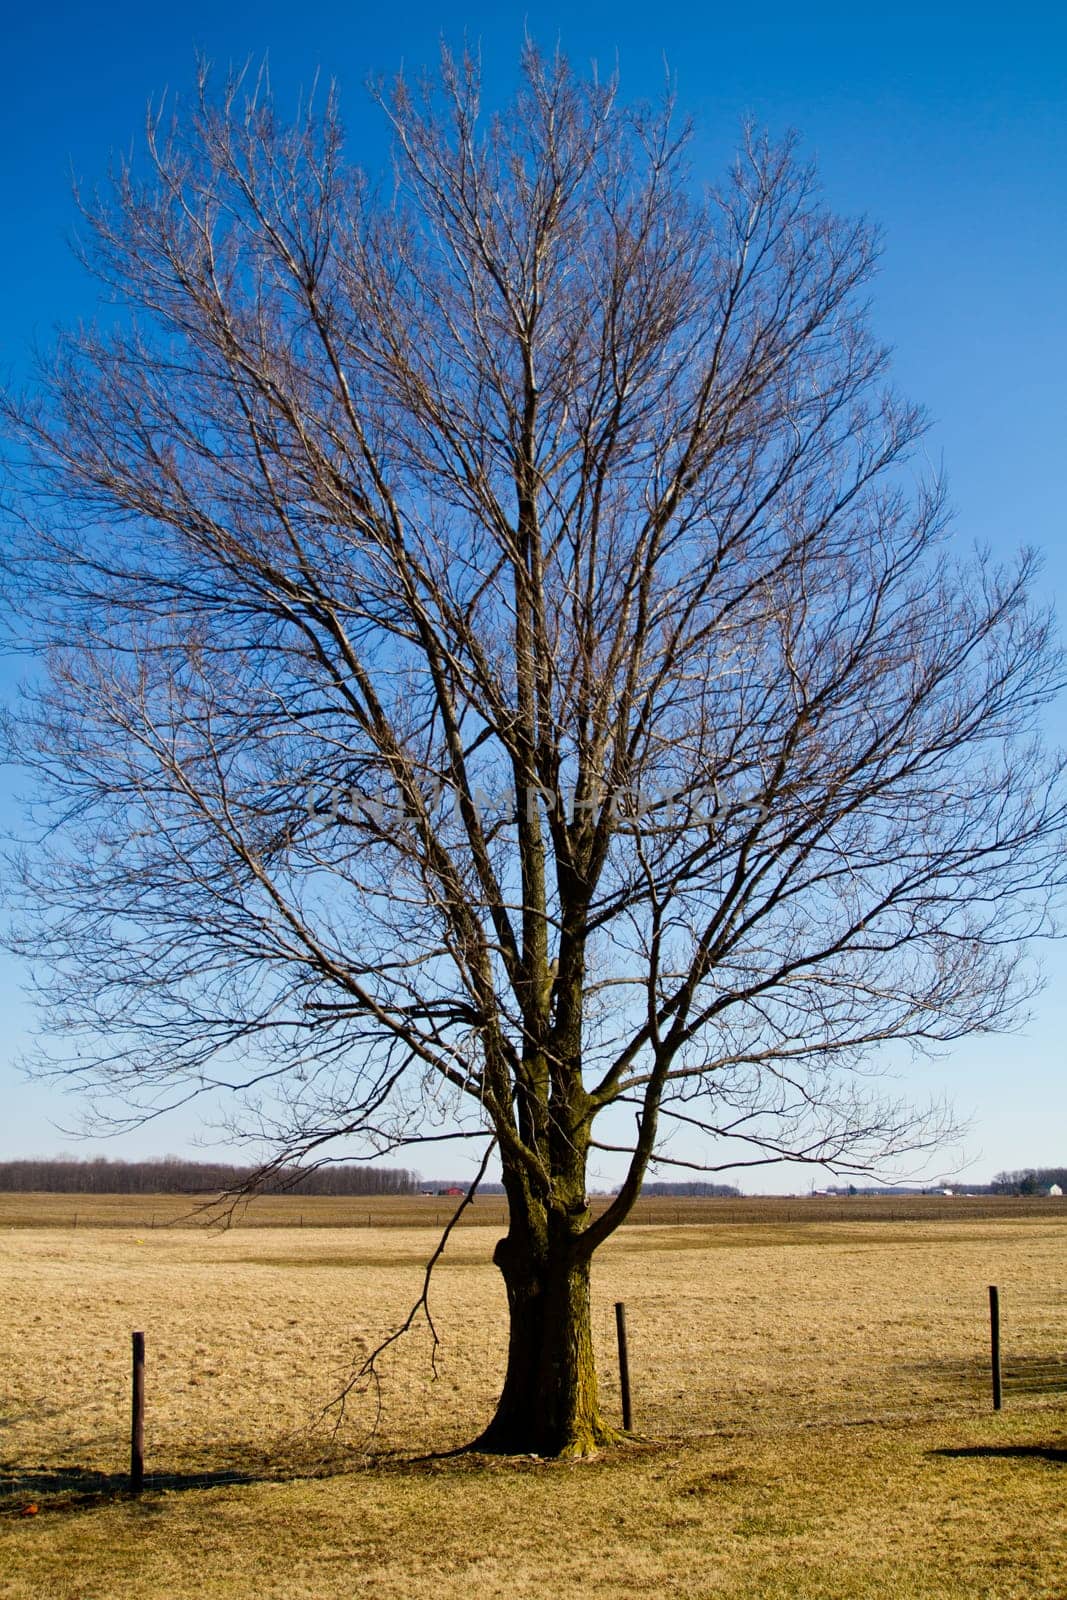 Solitary Leafless Tree in Early Spring Rural Landscape by njproductions